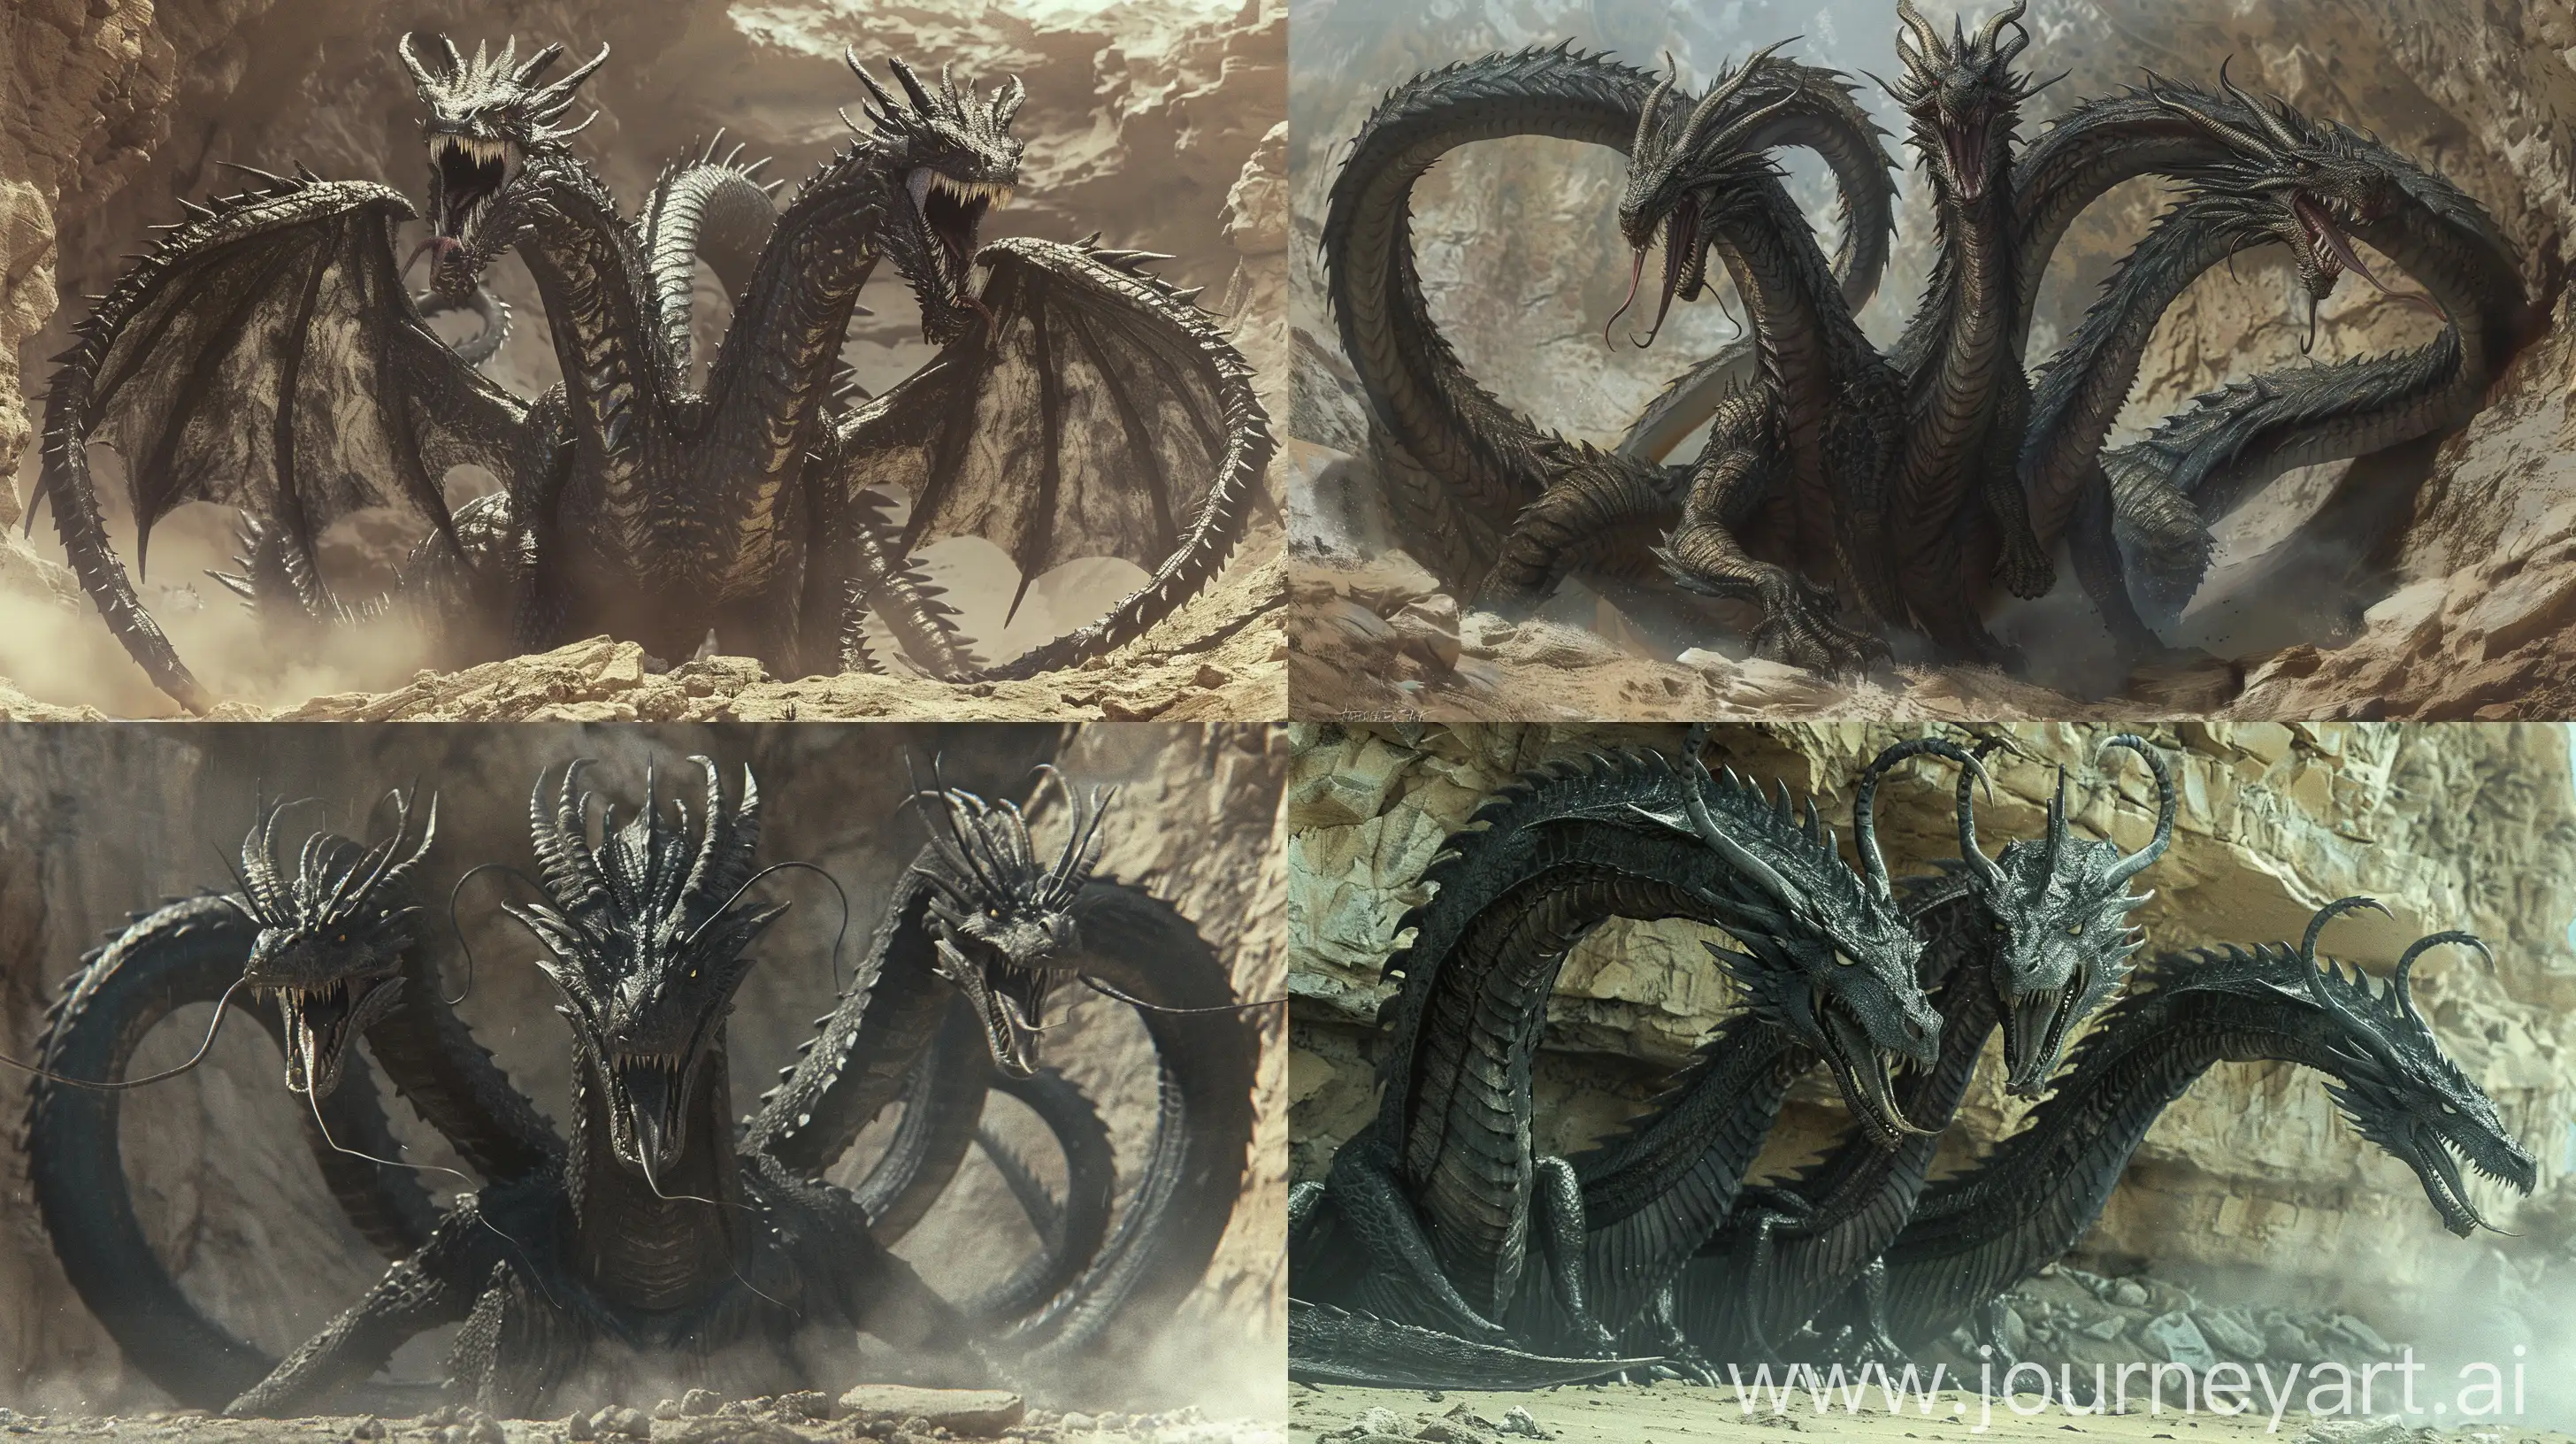 A scene under a stony mountain, there is a truly colossal draconic beast, with three long dragon heads rising from a single muscular neck covered in shimmering black scales. Each head has an enormous serrated maw filled with rows of razor-sharp fangs capable of shredding anything in its path. Large reptilian eyes with black irises glow with ancient. Two long, curved horn-like protrusions jut backwards from each scaly skull. Forked tongues lash the air with a malevolent hiss.

The vast body is a massive scaly form of rippling muscle, with two membrane-winged appendages of immense wingspan emerging from the back. Sharp blade-like talons arm the front and rear limbs. A lengthy spiked tail violently whips around, capable of demolishing buildings with its devastating strikes. --ar 16:9